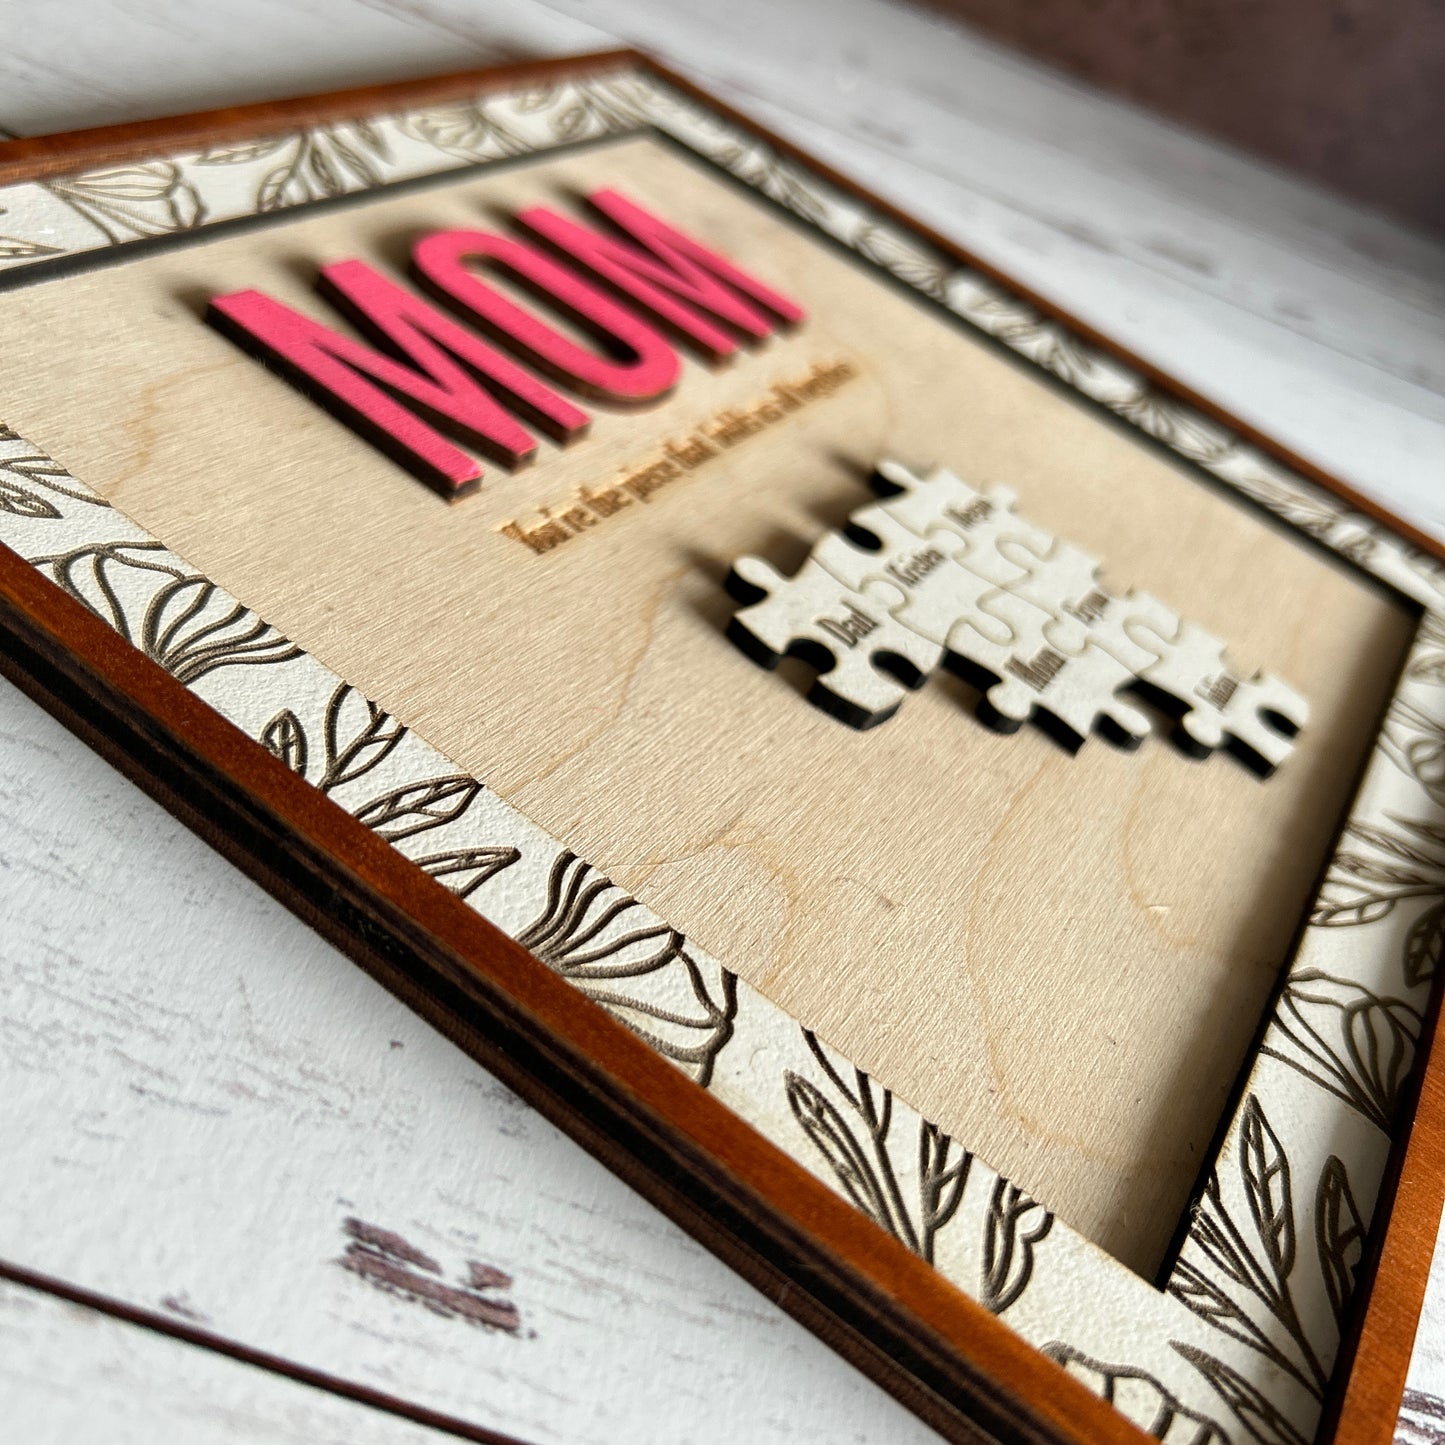 Personalized Puzzle Piece Sign for Mom - Celebrate Your Family's Love!